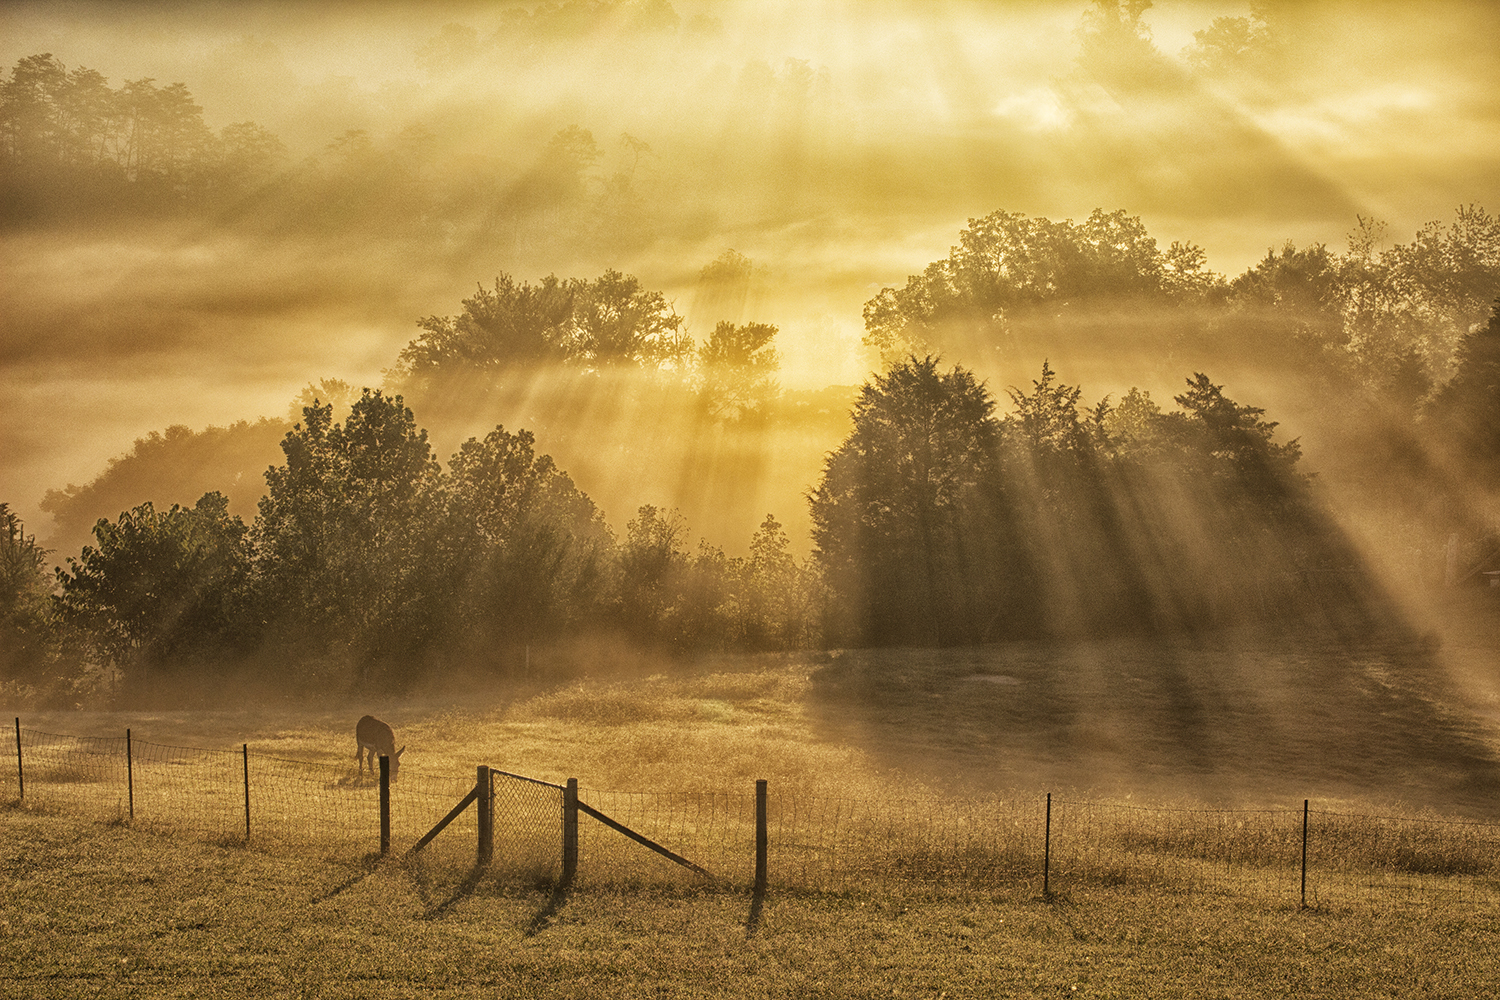 A donkey grazes on a farm bathed in misty sunlight in Townsend, Tennessee.